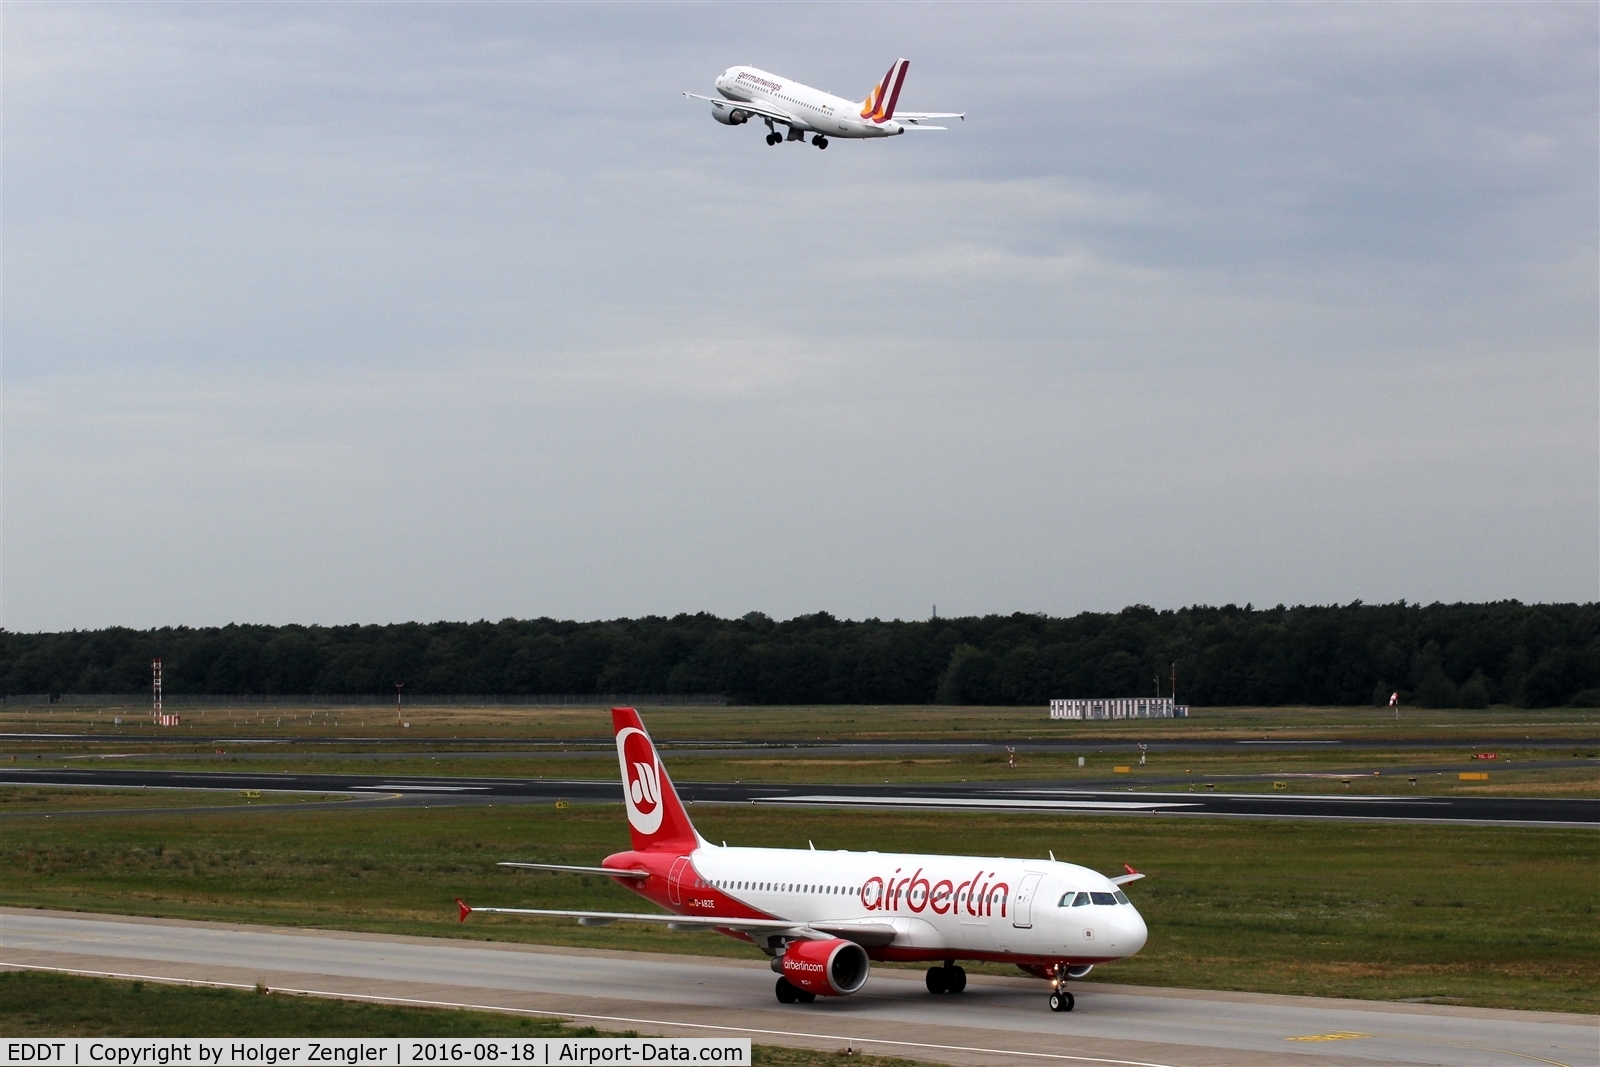 Tegel International Airport (closing in 2011), Berlin Germany (EDDT) - Coming and going unter a grey sky....